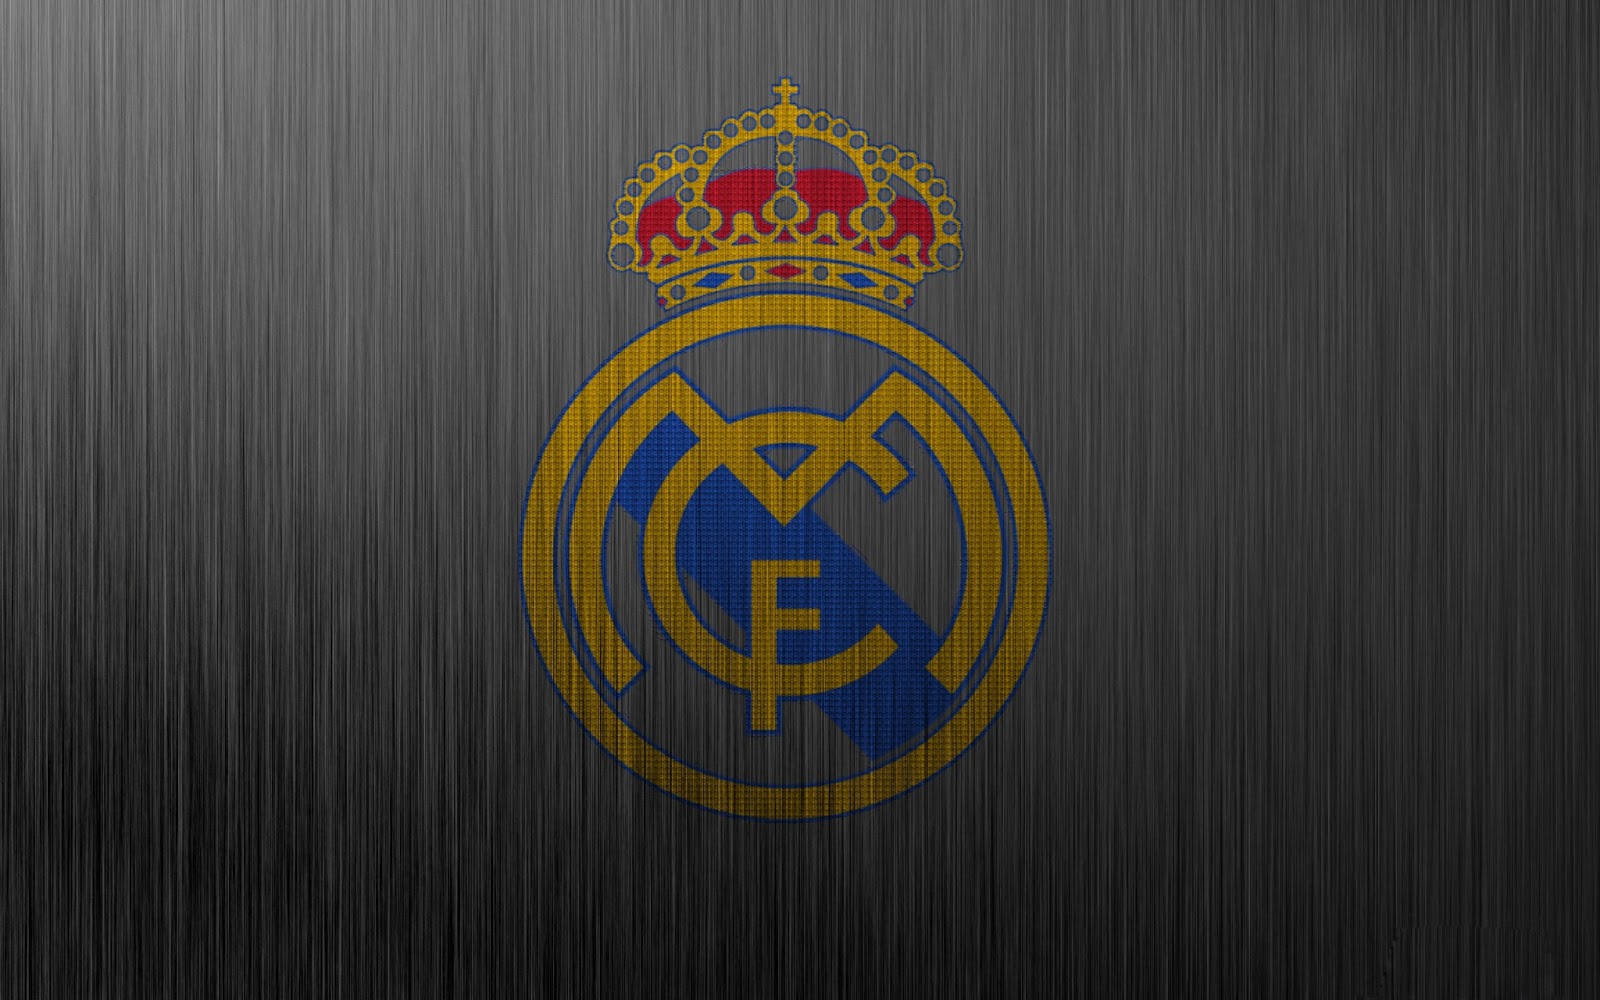 All Wallpapers Real Madrid 2013 Wallpapers HD Wallpapers Download Free Images Wallpaper [wallpaper981.blogspot.com]